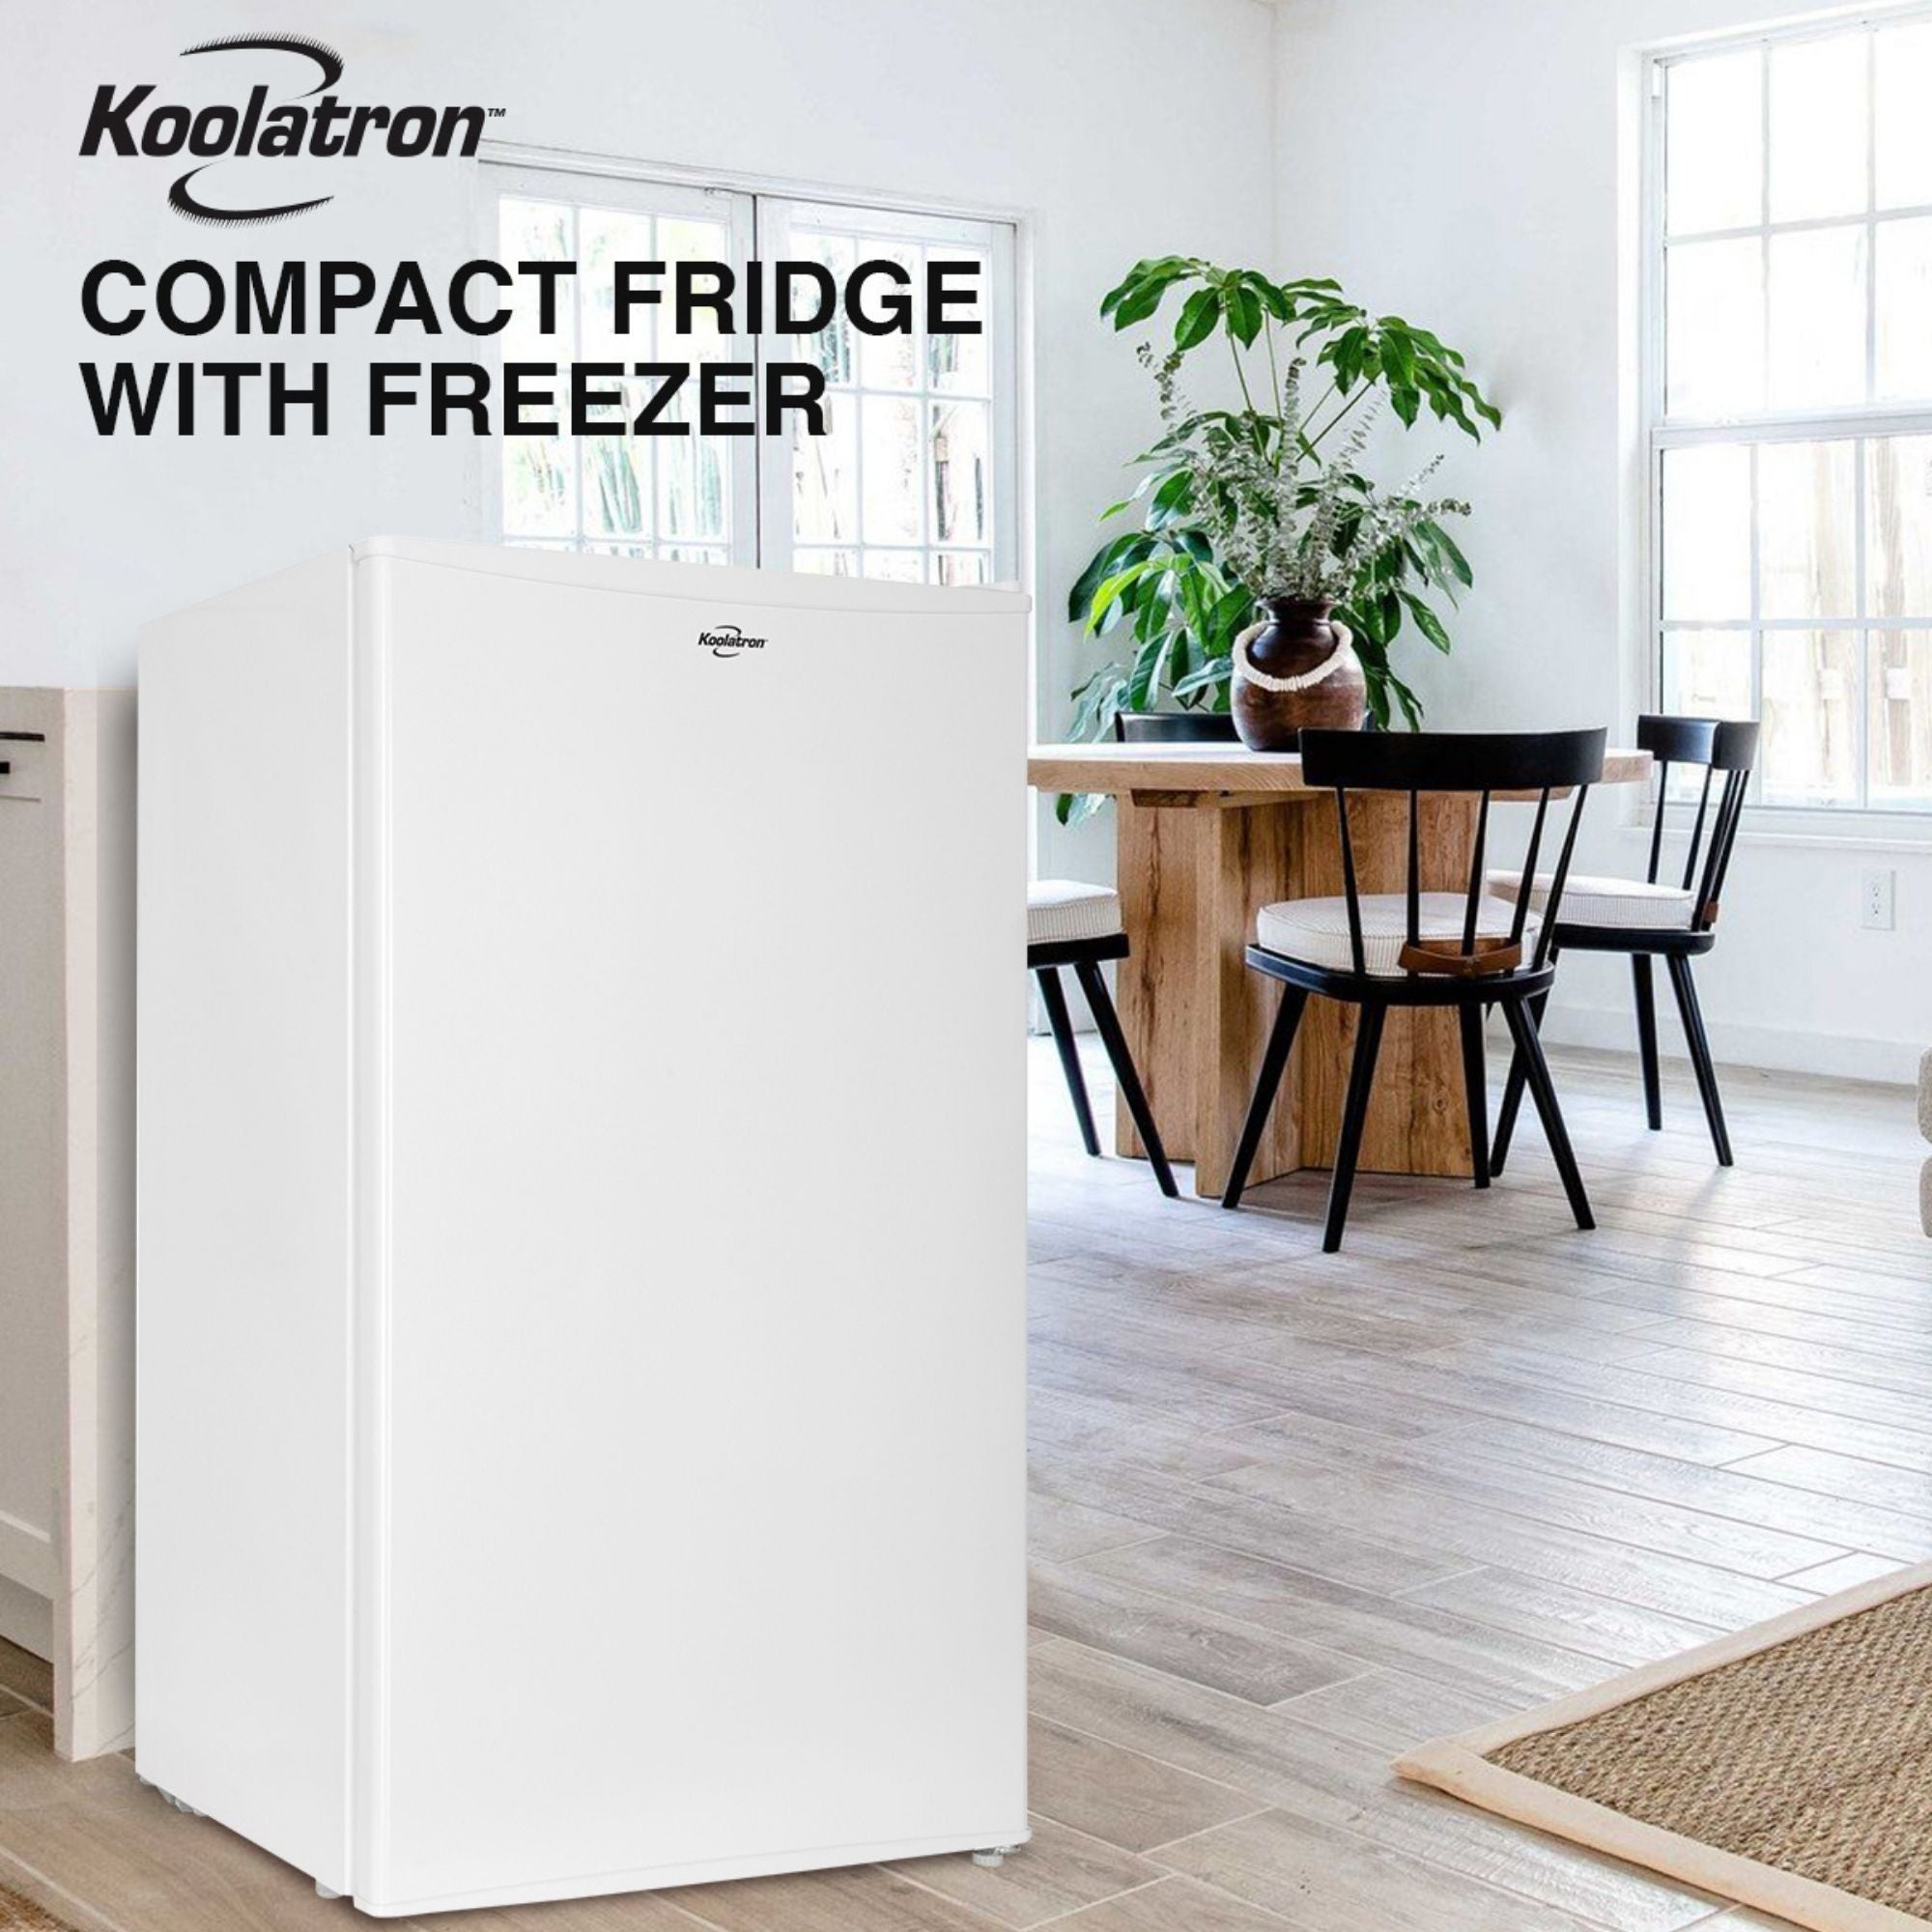 Lifestyle image of white compact fridge with freezer on a light-colored plank floor with a wooden table and chairs, two large windows, and a large potted plant in the background. Text above reads "Koolatron compact fridge with freezer"